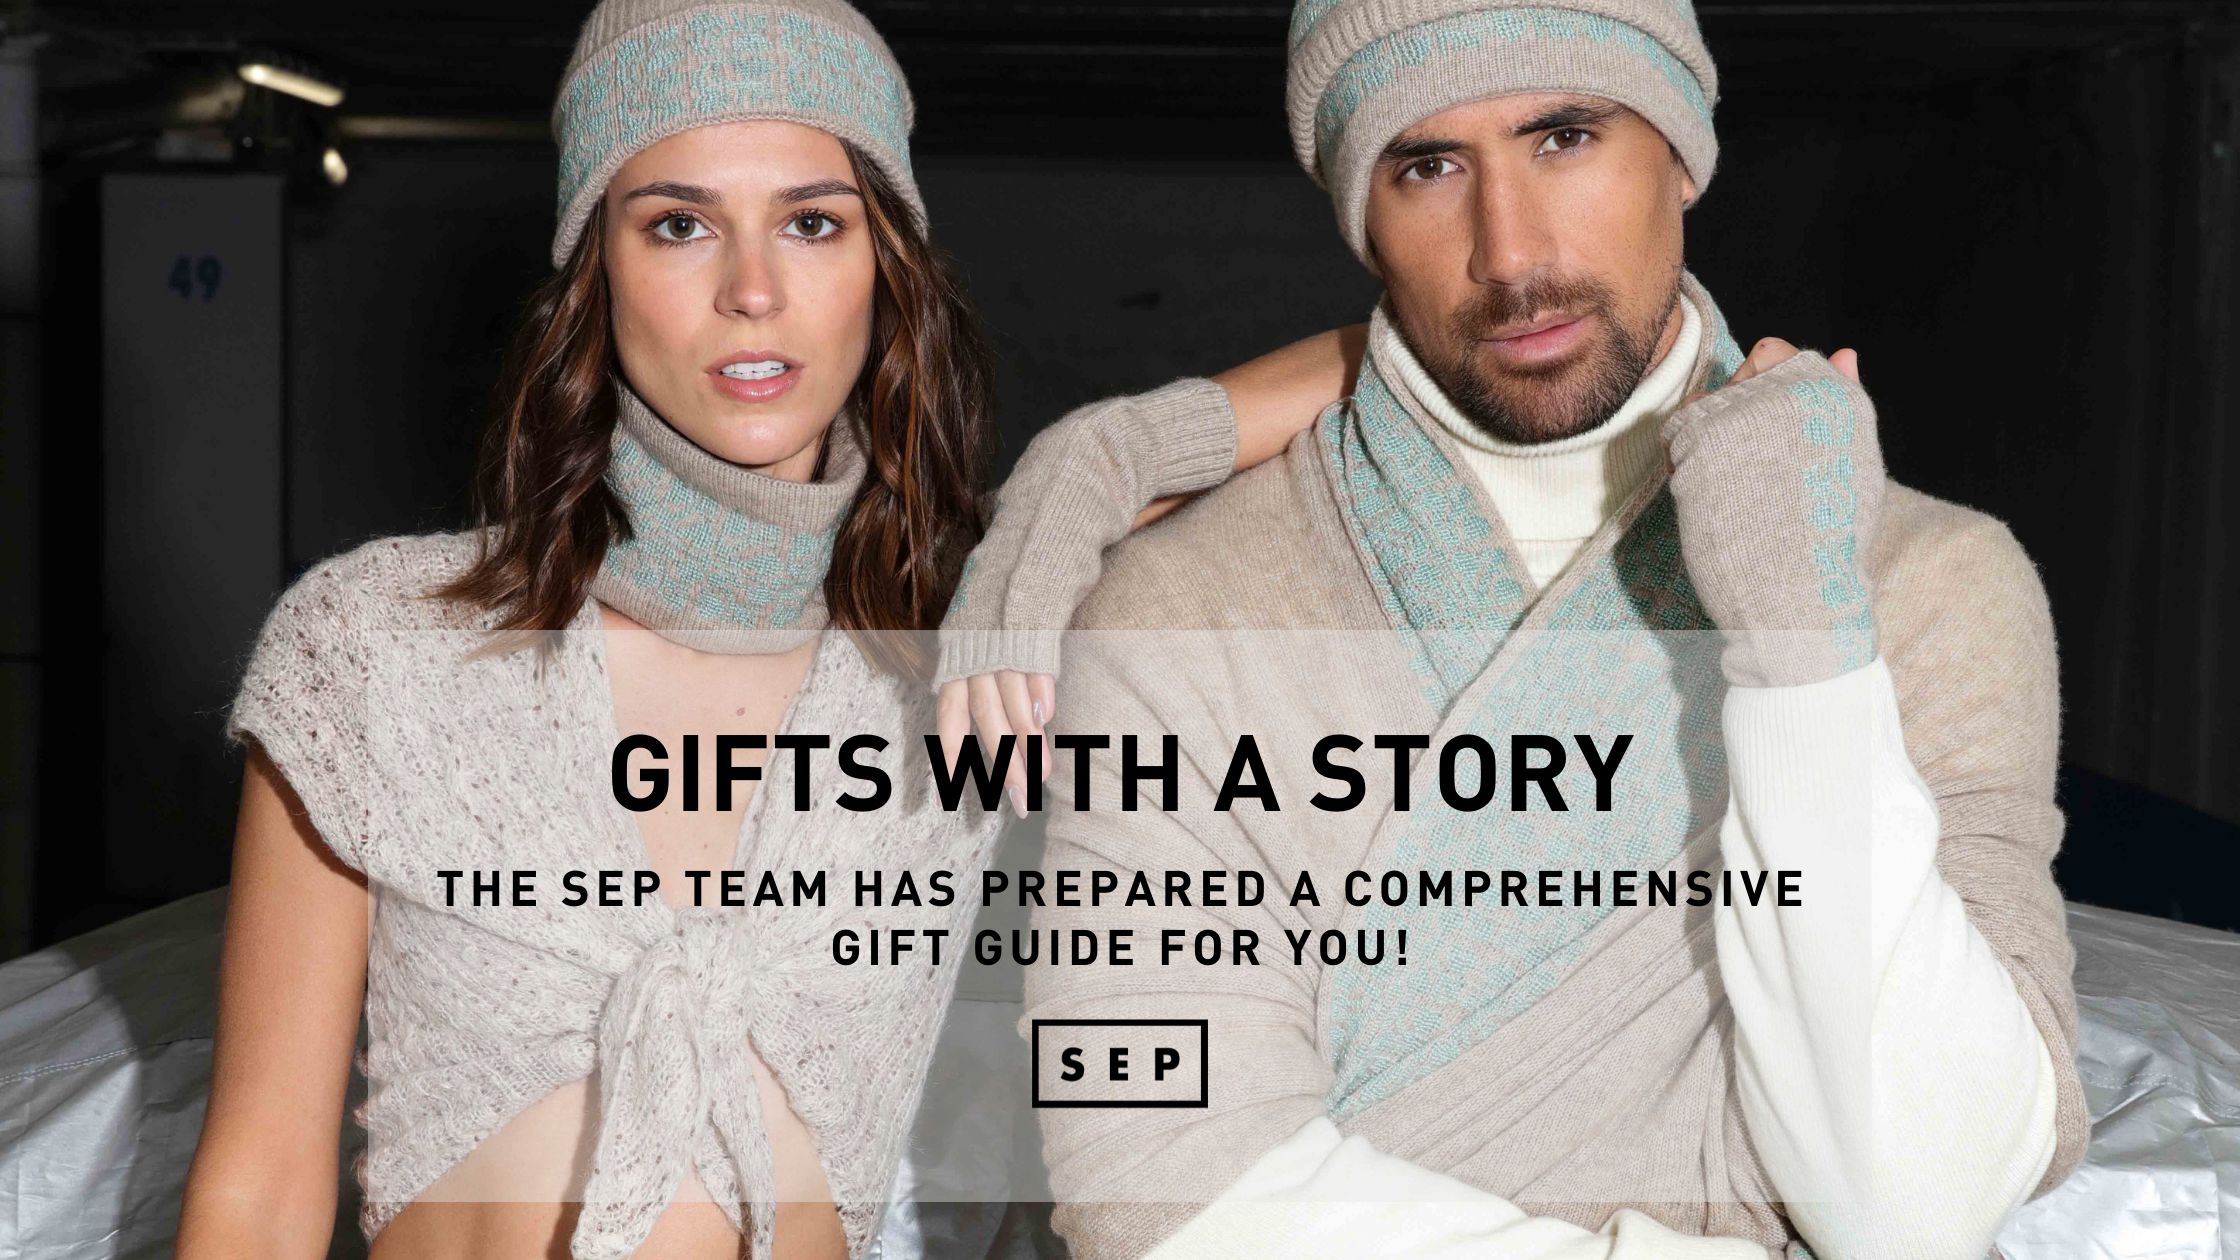 THE SEP TEAM has prepared a comprehensive gift guide for you!